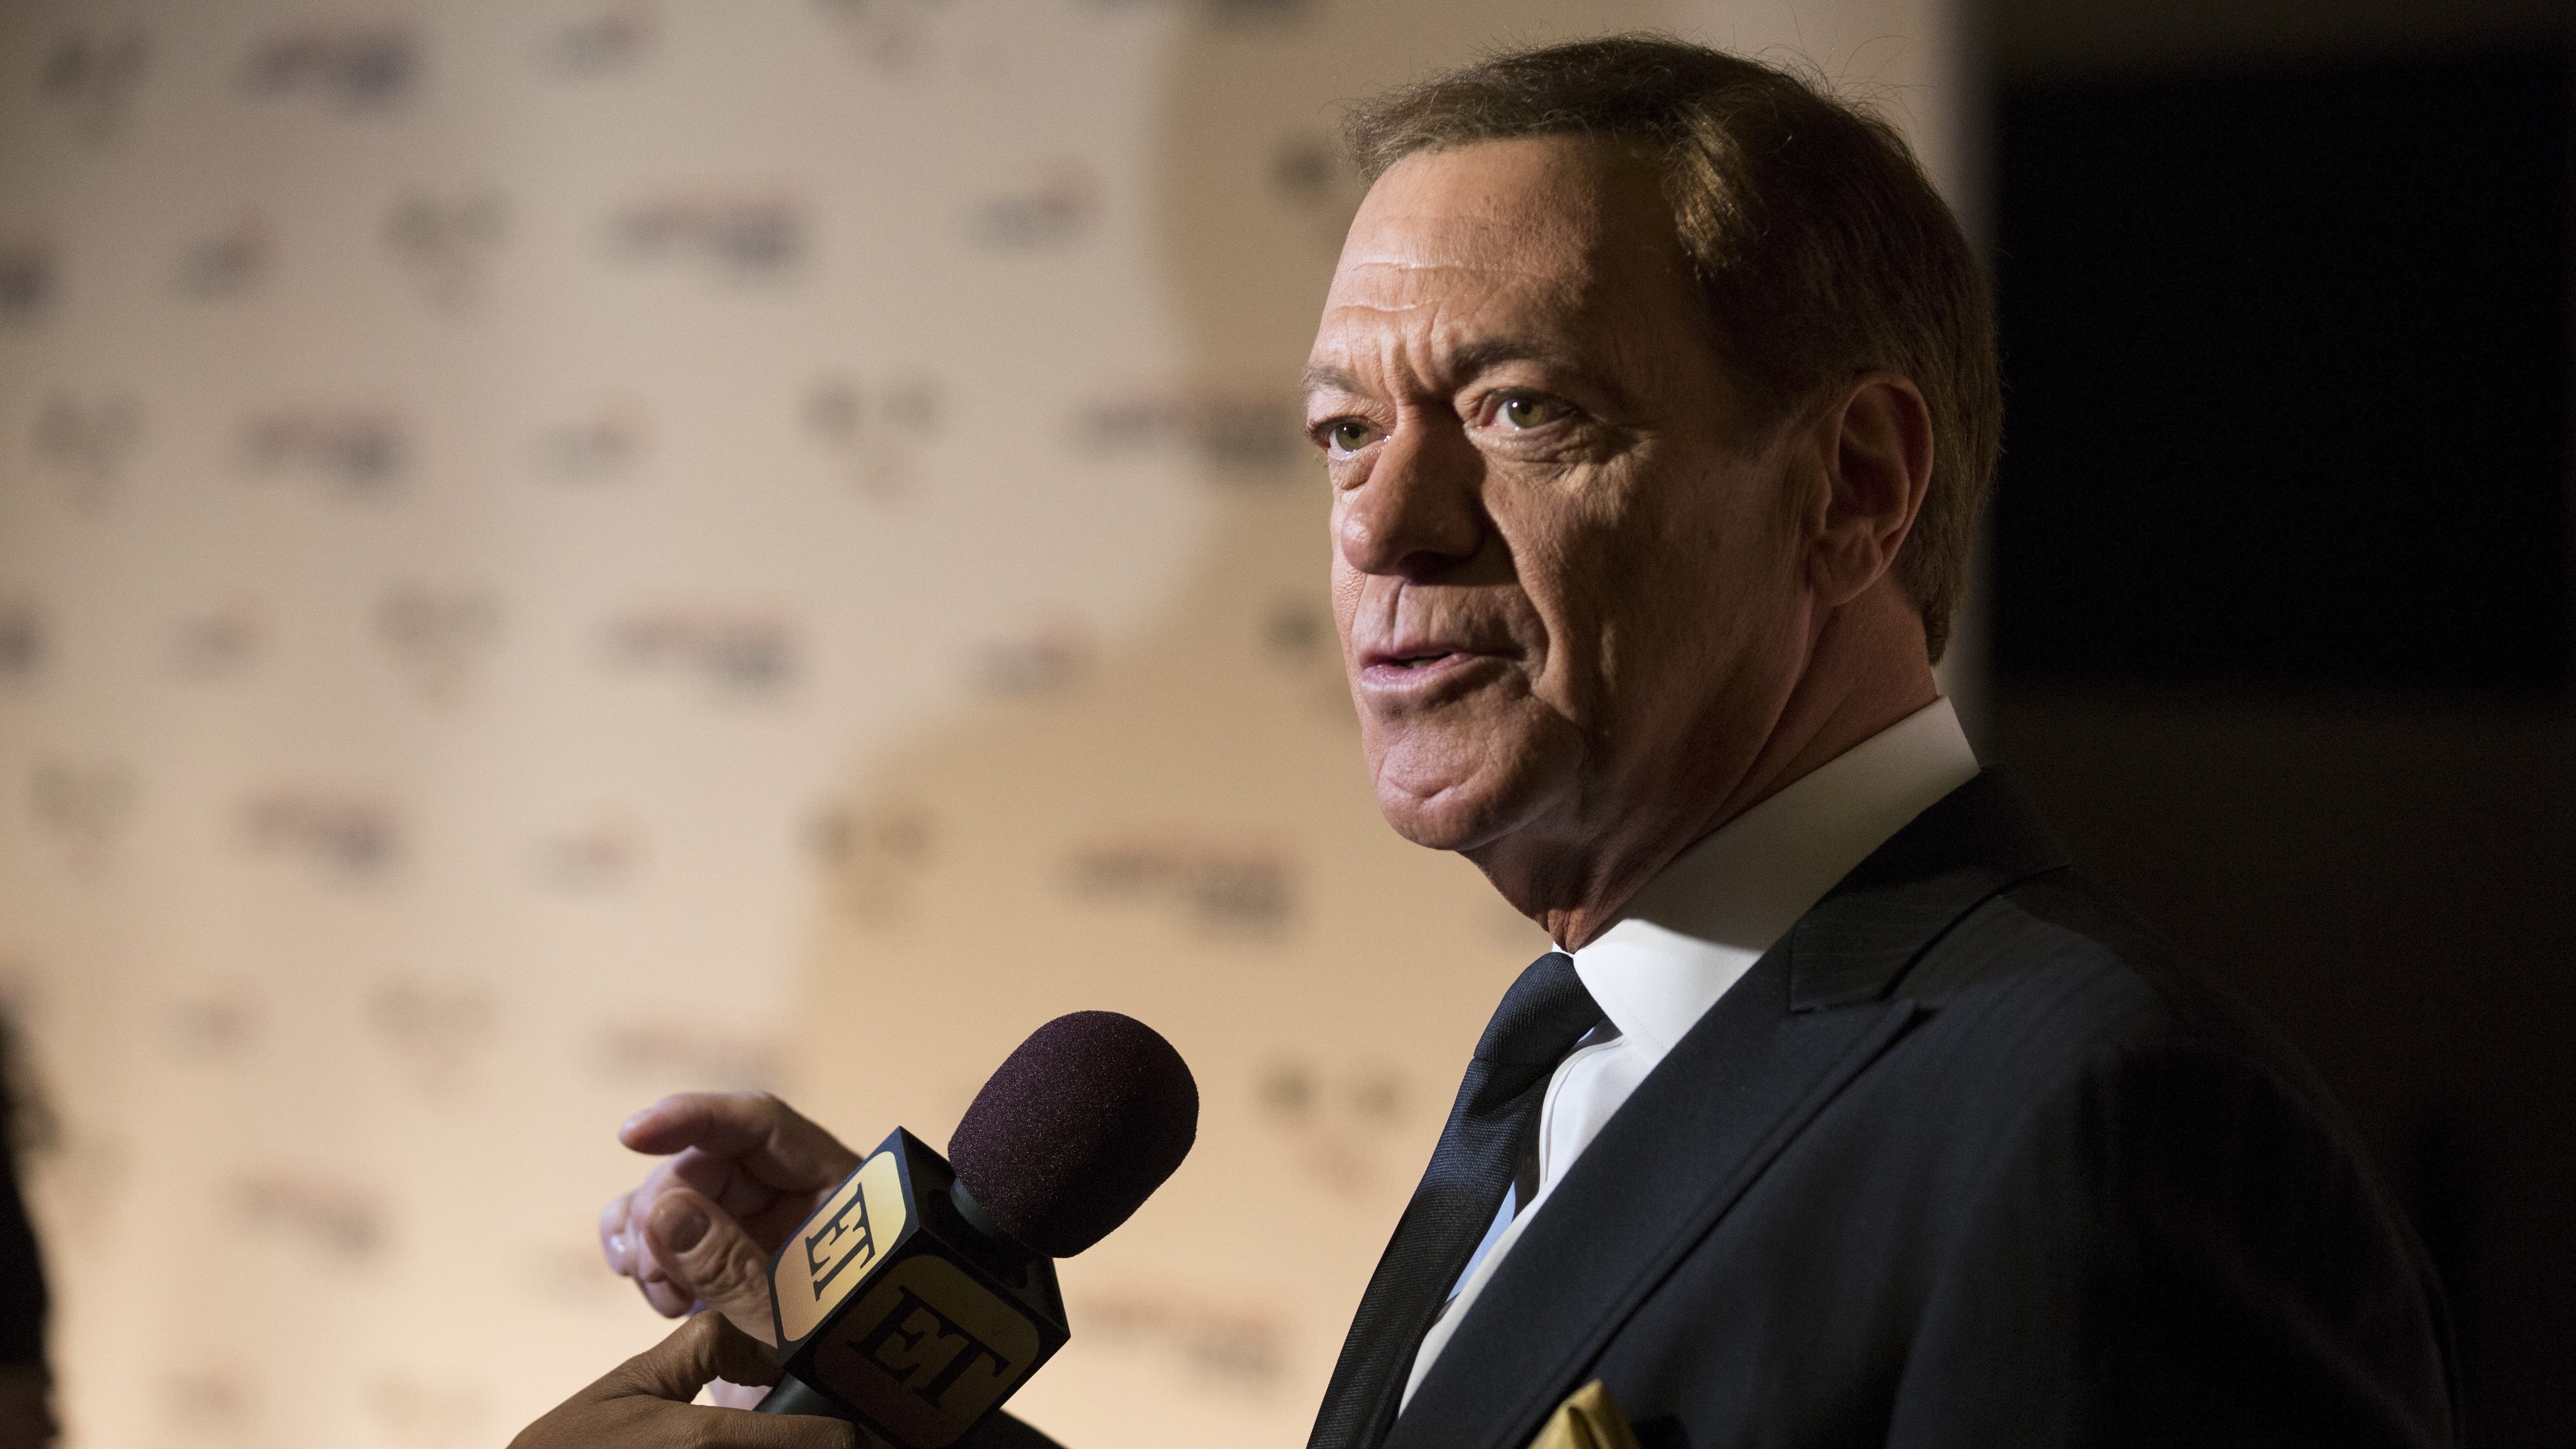 Joe Piscopo: 'Gangster' Putin 'took over the whole neighborhood' with 'nobody in Oval office'